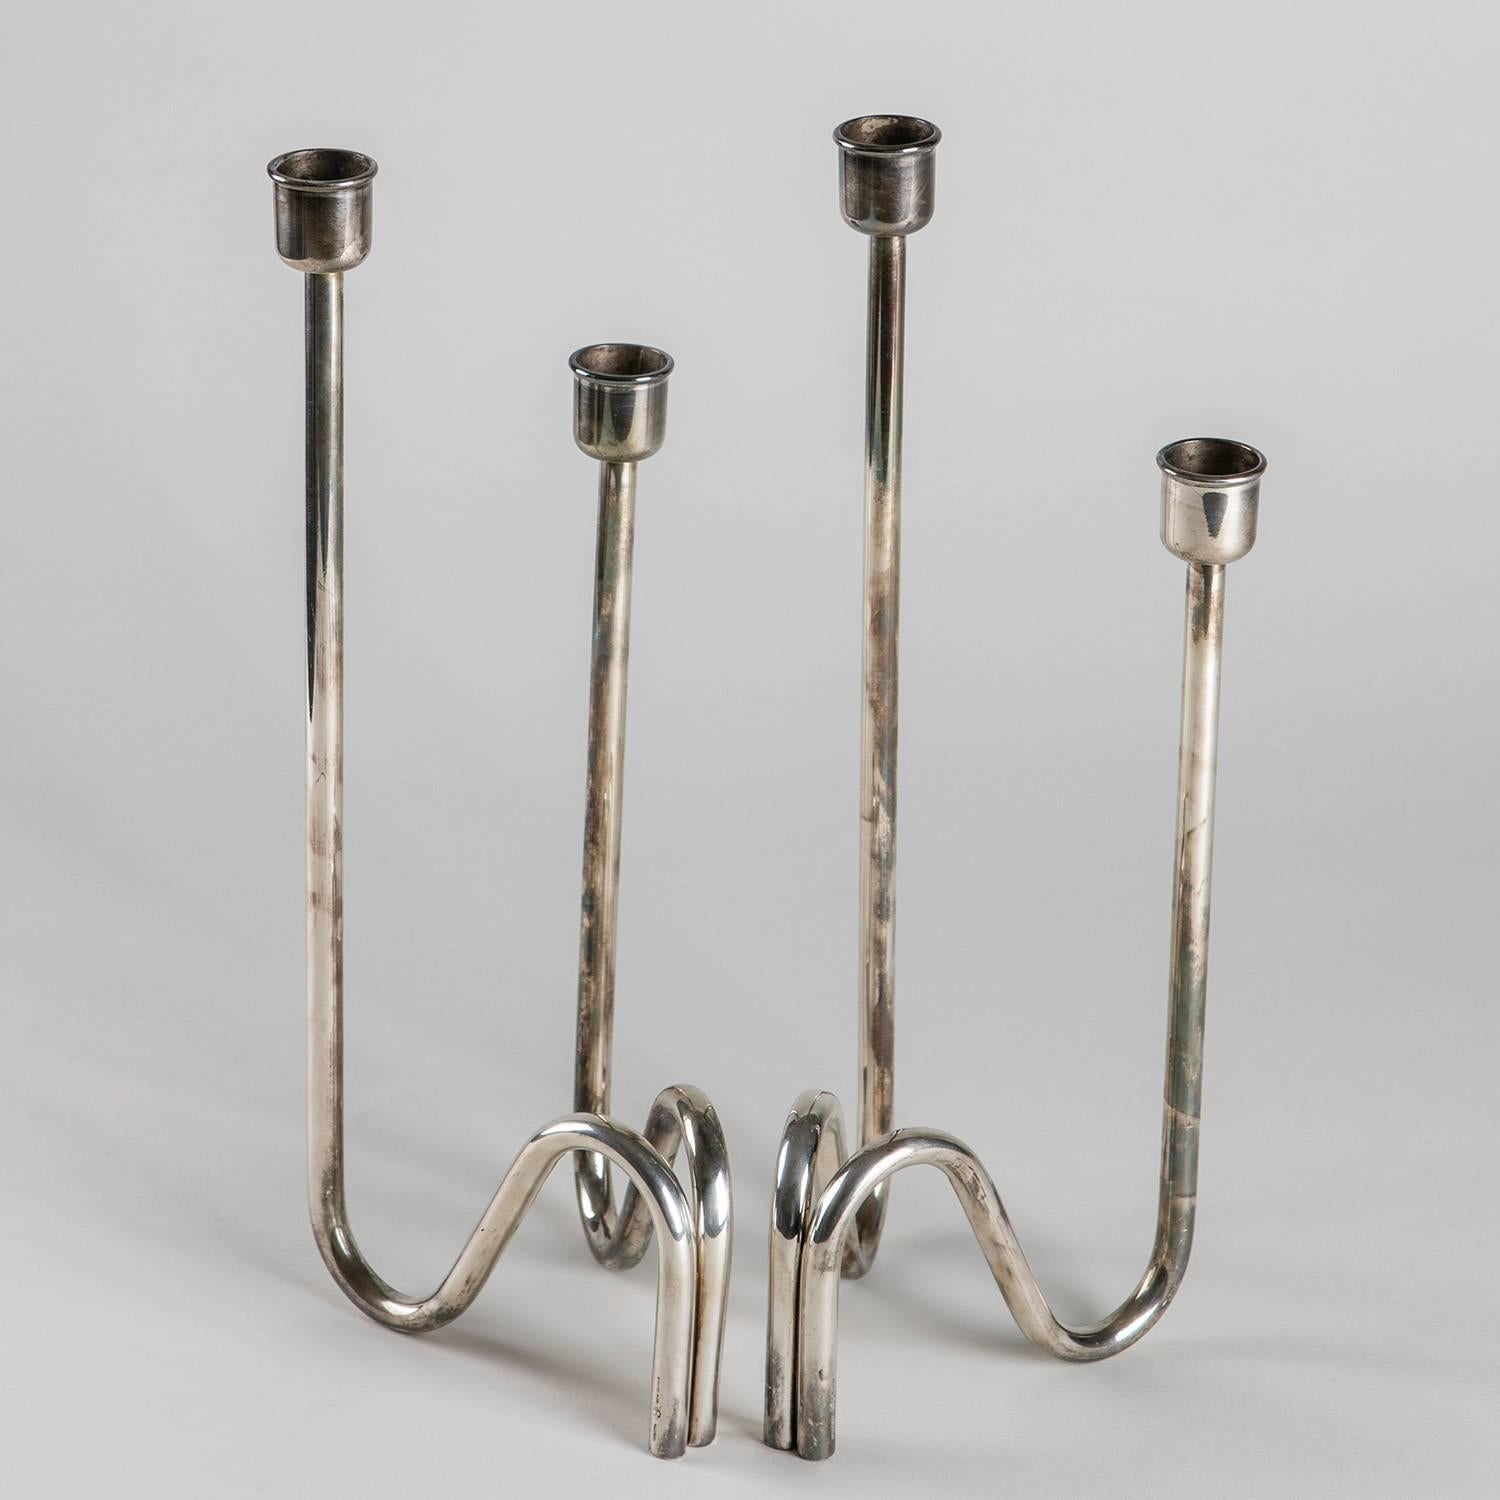 Set of two silver plated candleholder by Lino Sabattini.